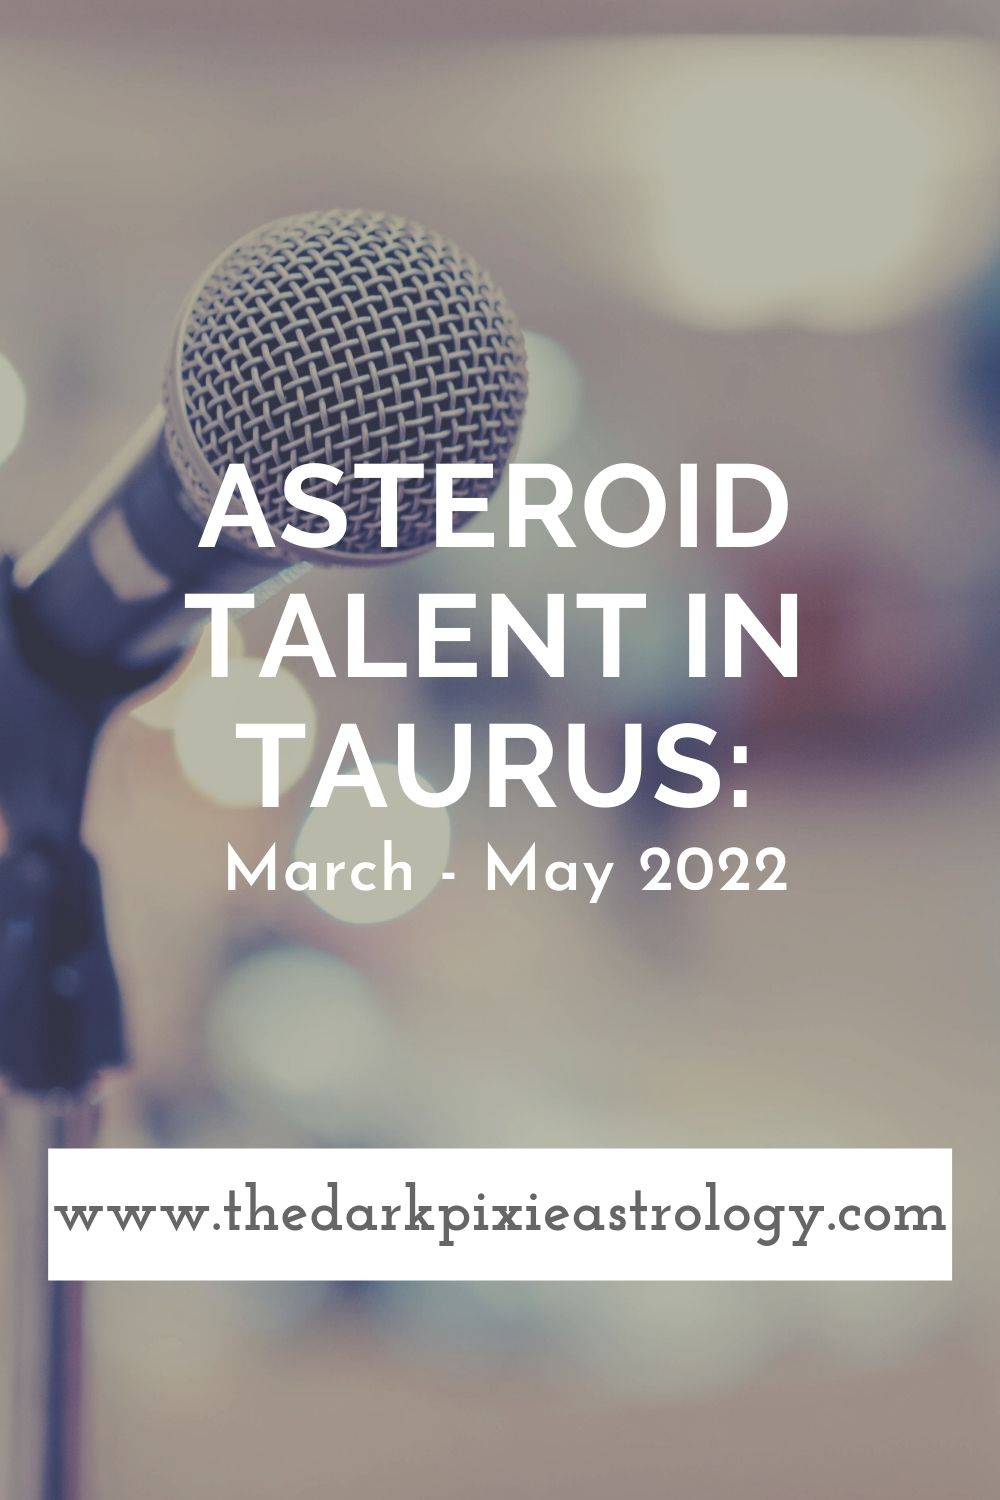 Asteroid Talent in Taurus: March - May 2022 - The Dark Pixie Astrology